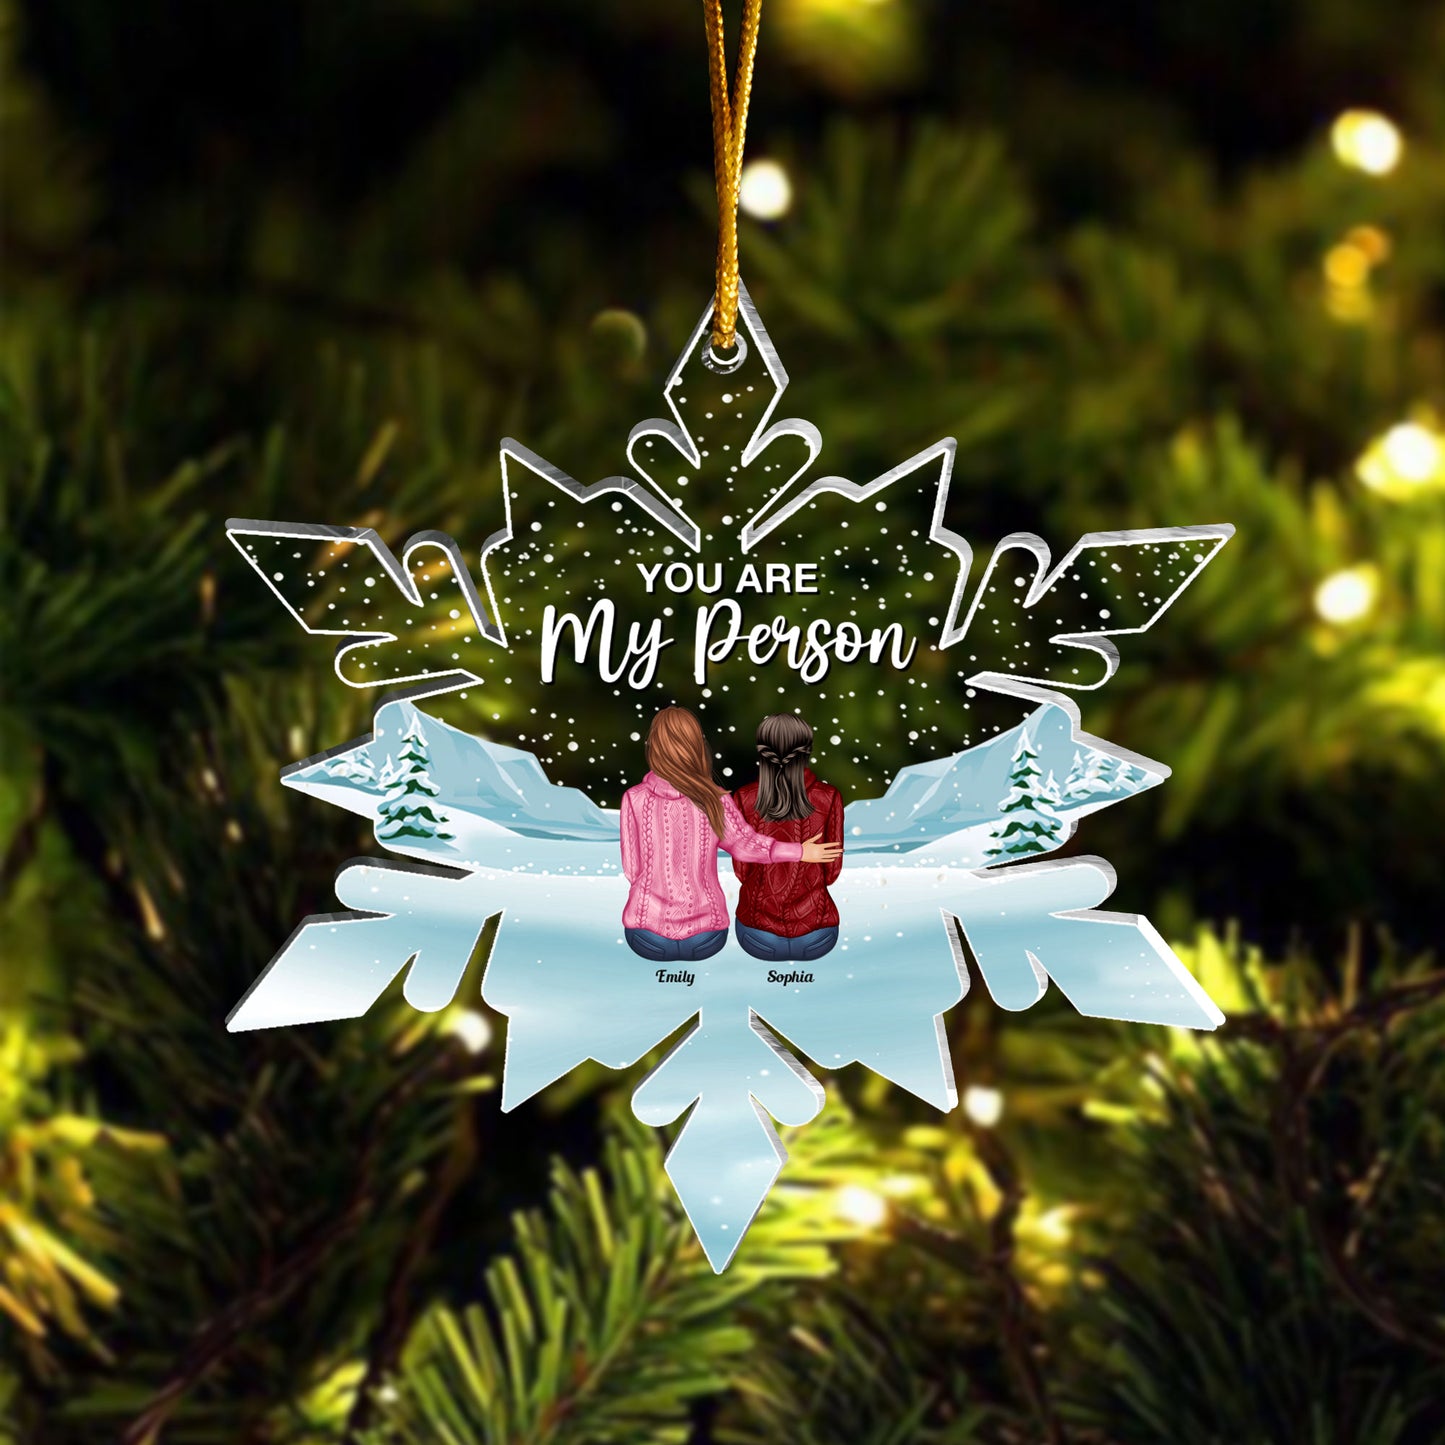 Always Sisters - Personalized Custom Shaped Acrylic Ornament - Christmas Gift For Sisters, Besties